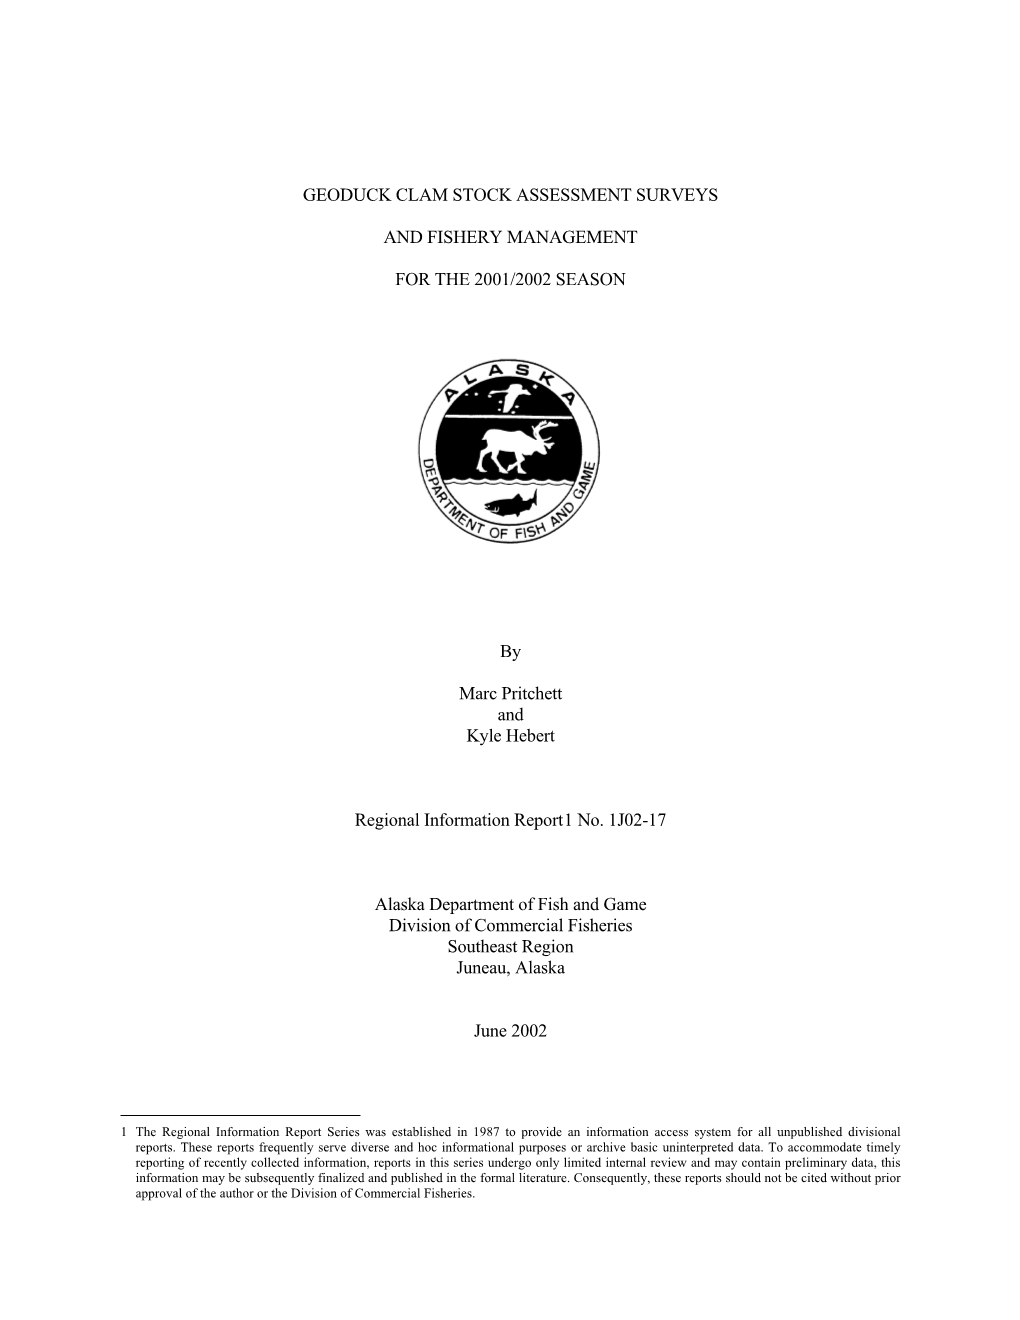 Geoduck Clam Stock Assessment Surveys and Fishery Management for the 2001/2002 Season